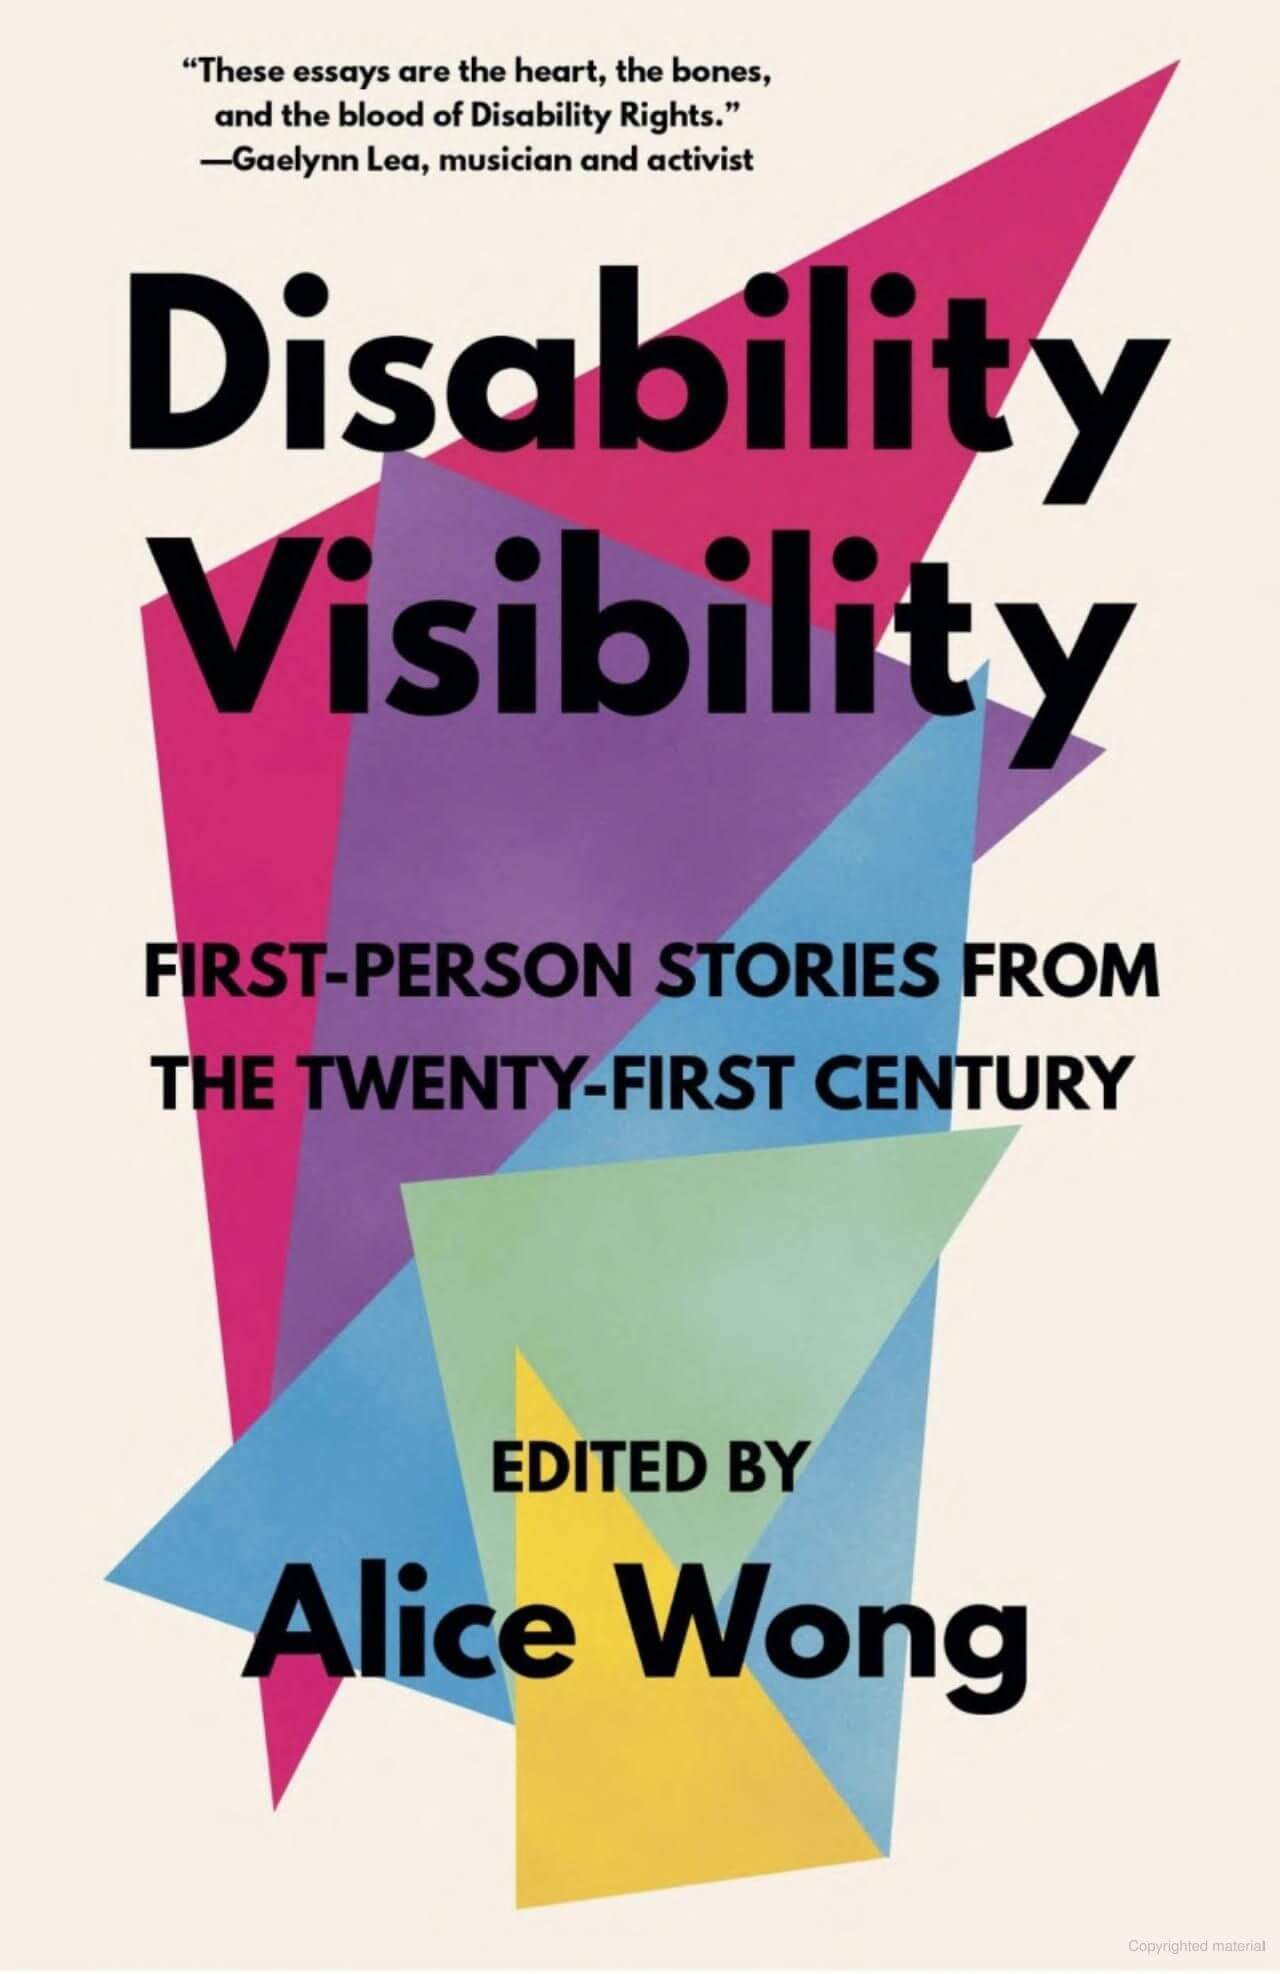 The Disability Visibility: First-Person Stories from the Twenty-First Century book cover. It has a beige background and various colors and shapes coming together to create a block of space for the title and the text, edited by 'Alice Wong' at the bottom - all text is black.